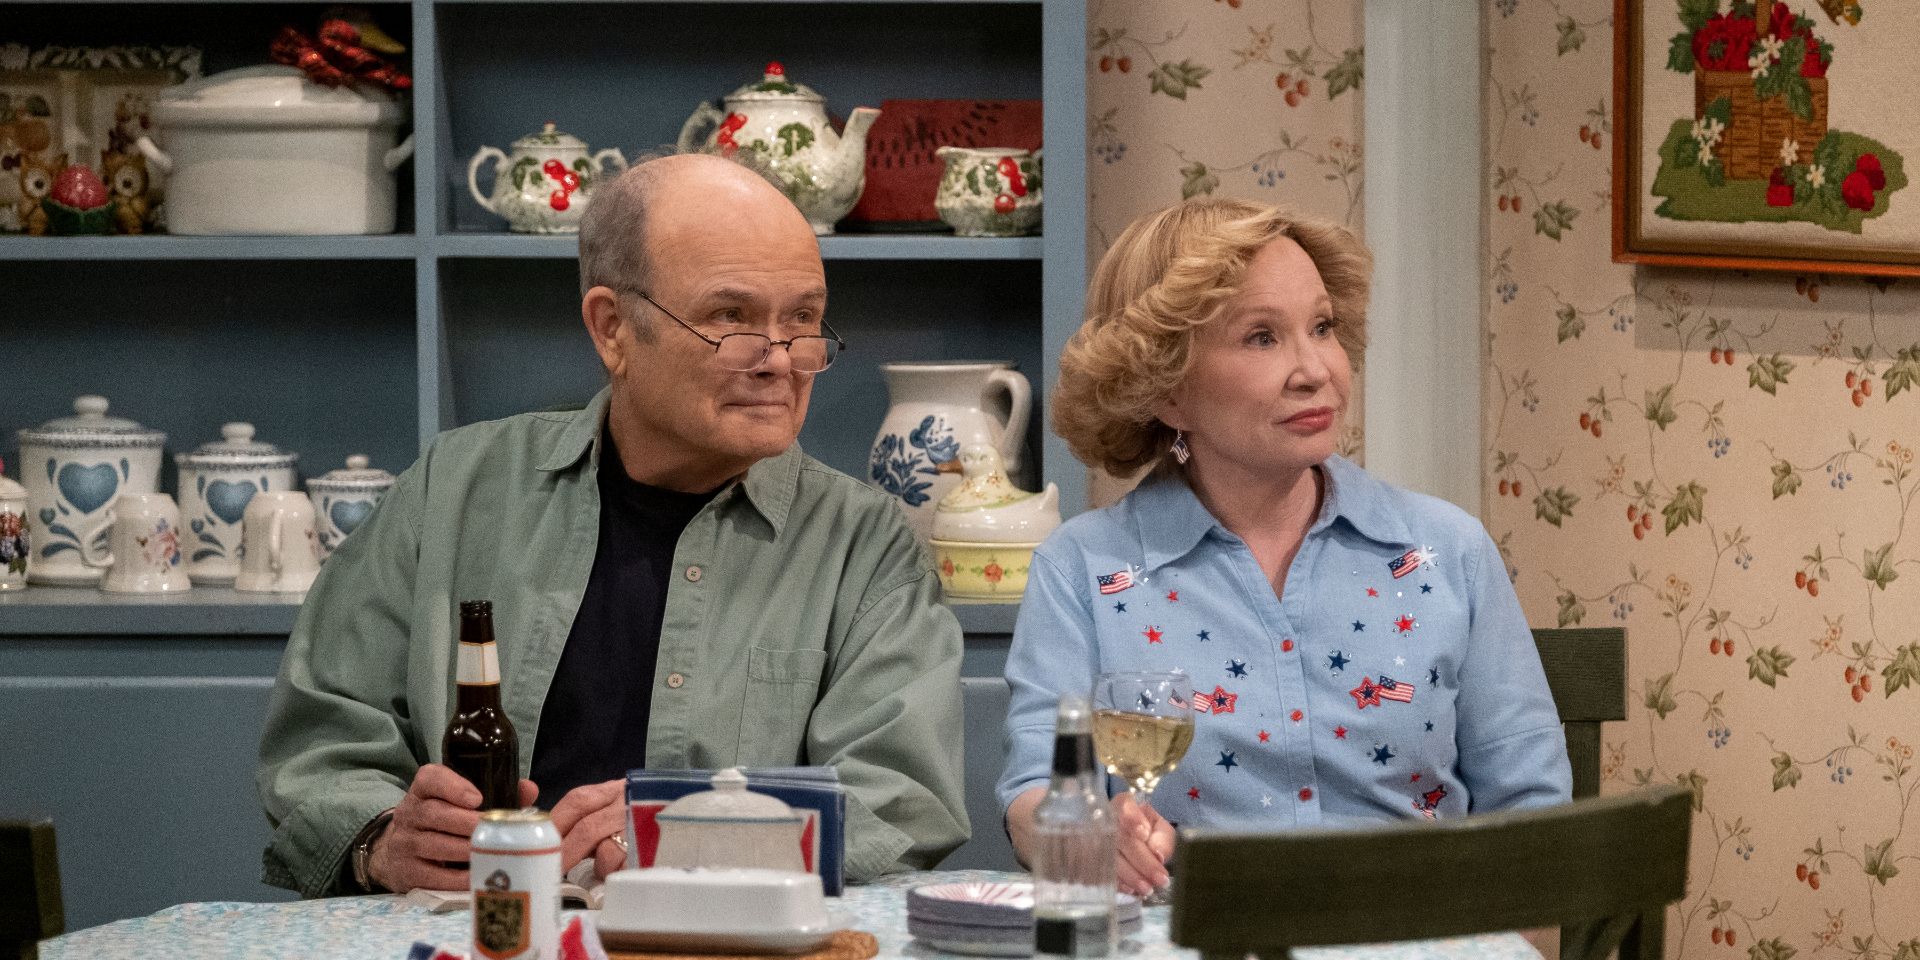 That '90s show stars Kurtwood Smith and Debra Jo Rupp as Red and Kitty Forman sitting together at the kitchen table.